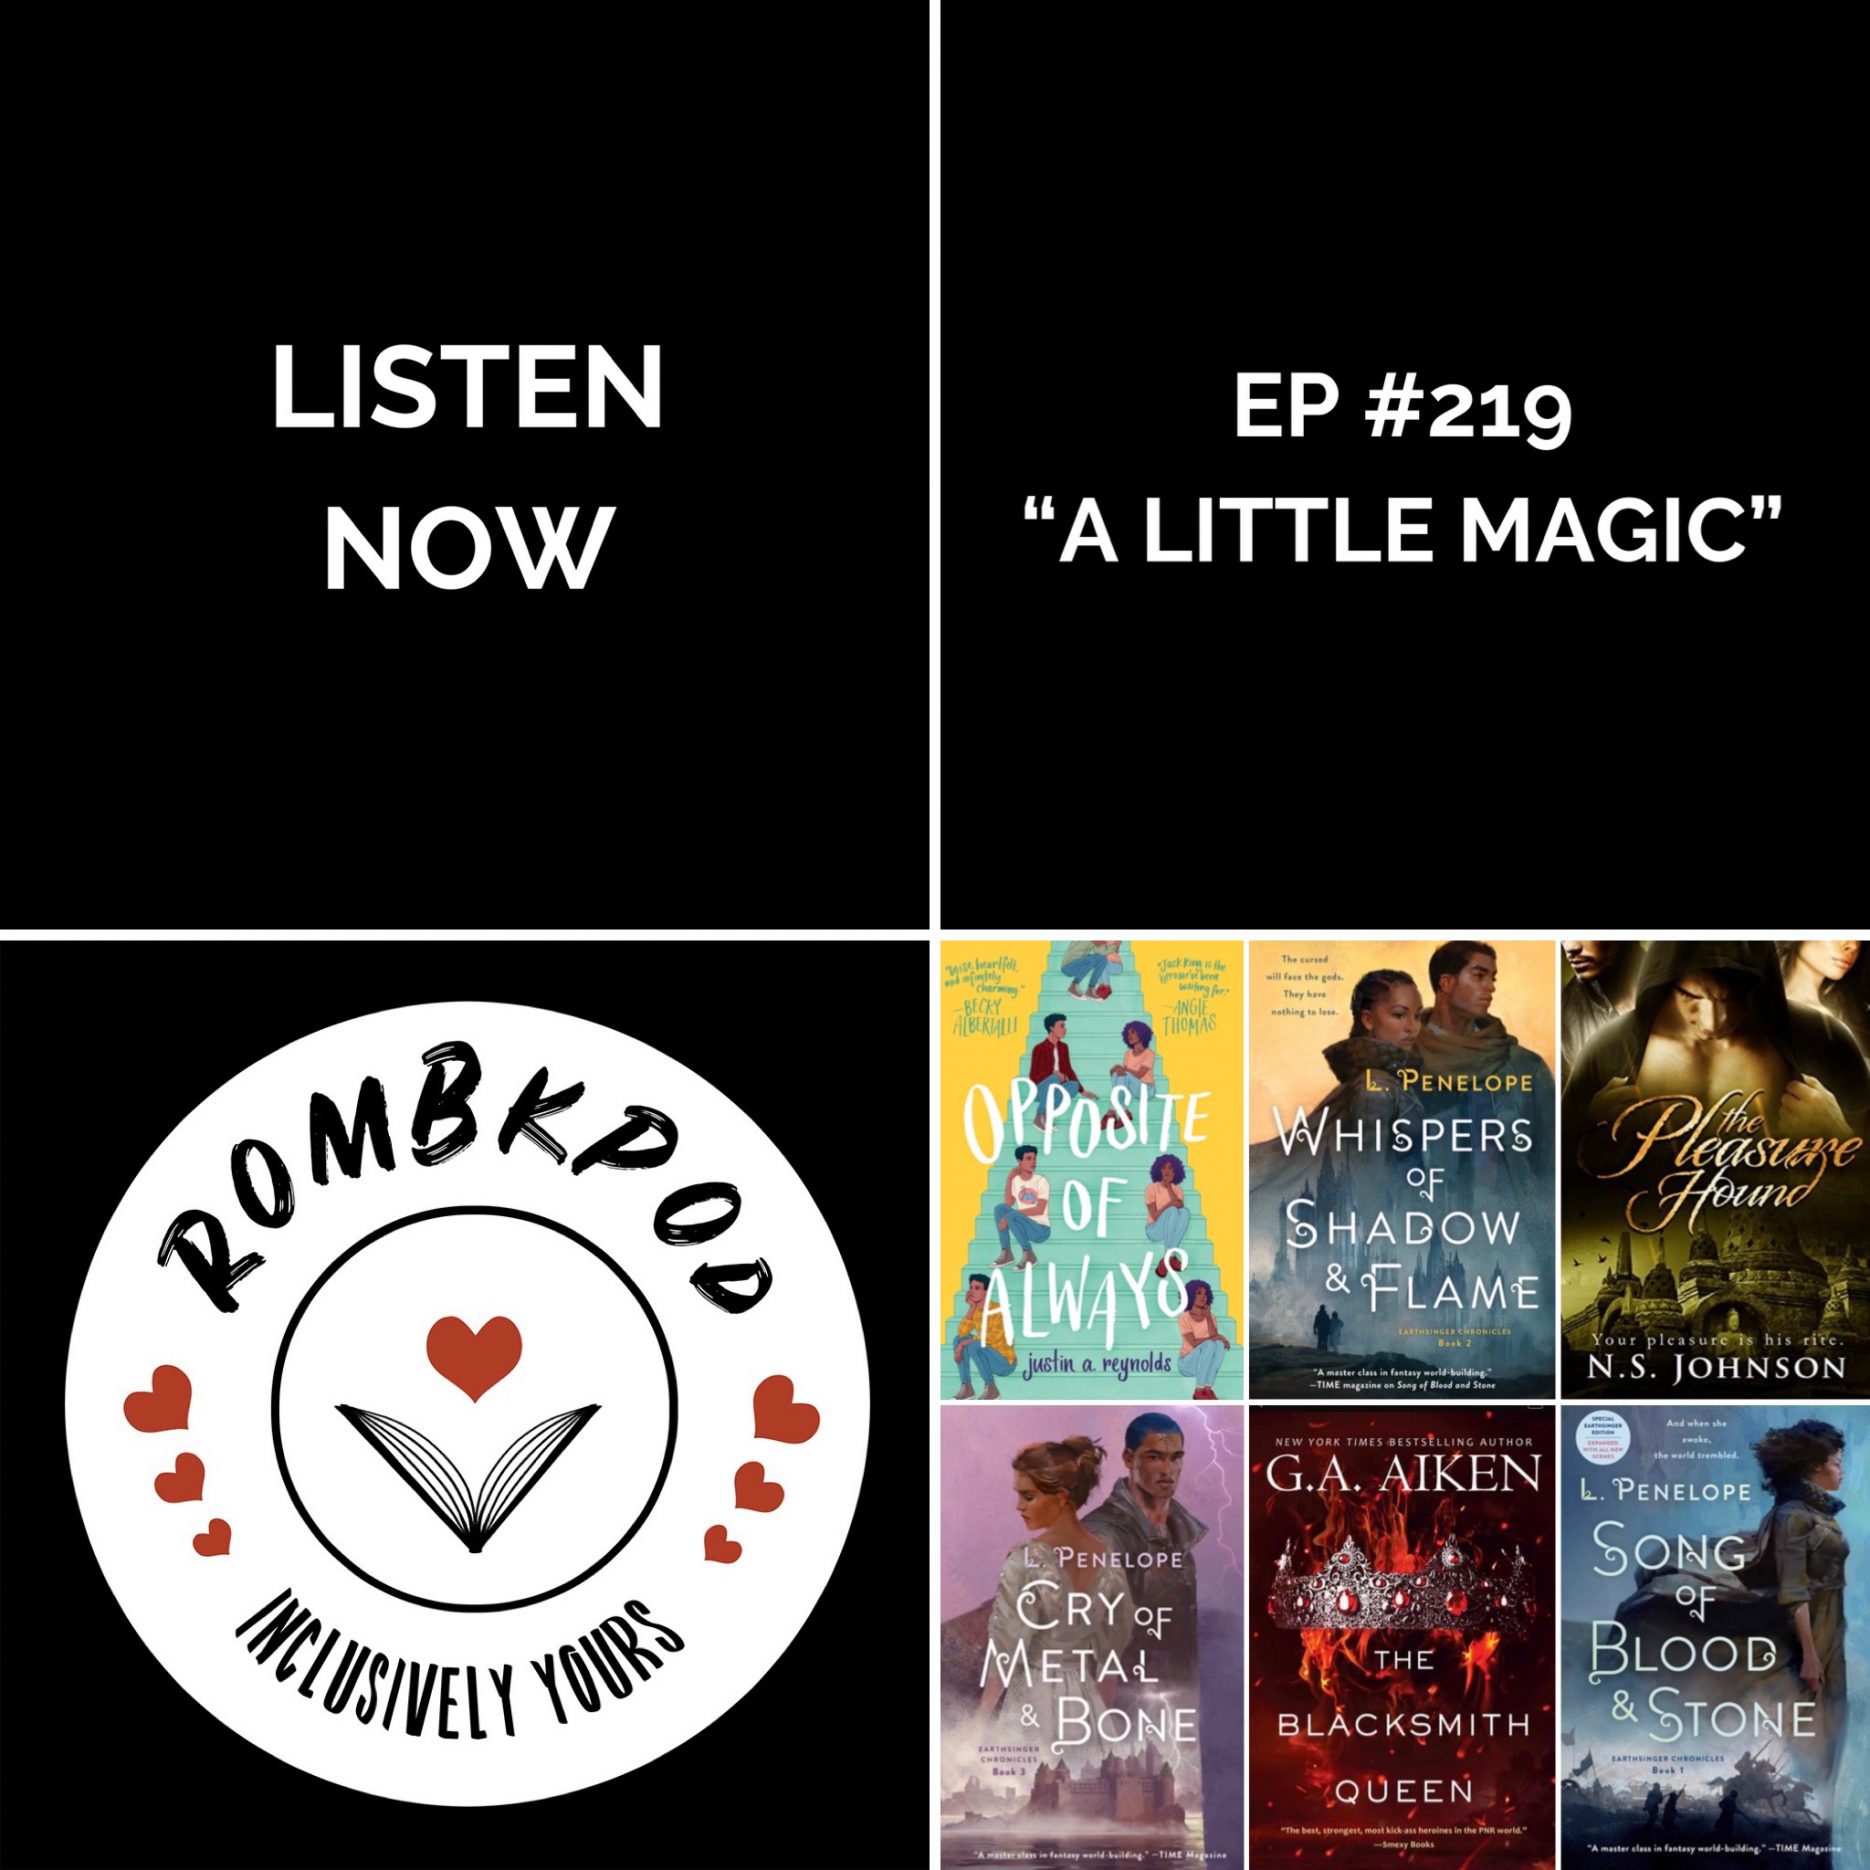 IMAGE: lower left corner, RomBkPod heart logo; lower right corner, ep #217 book cover collage; IMAGE TEXT: Listen Now, ep #219 "A Little Magic"